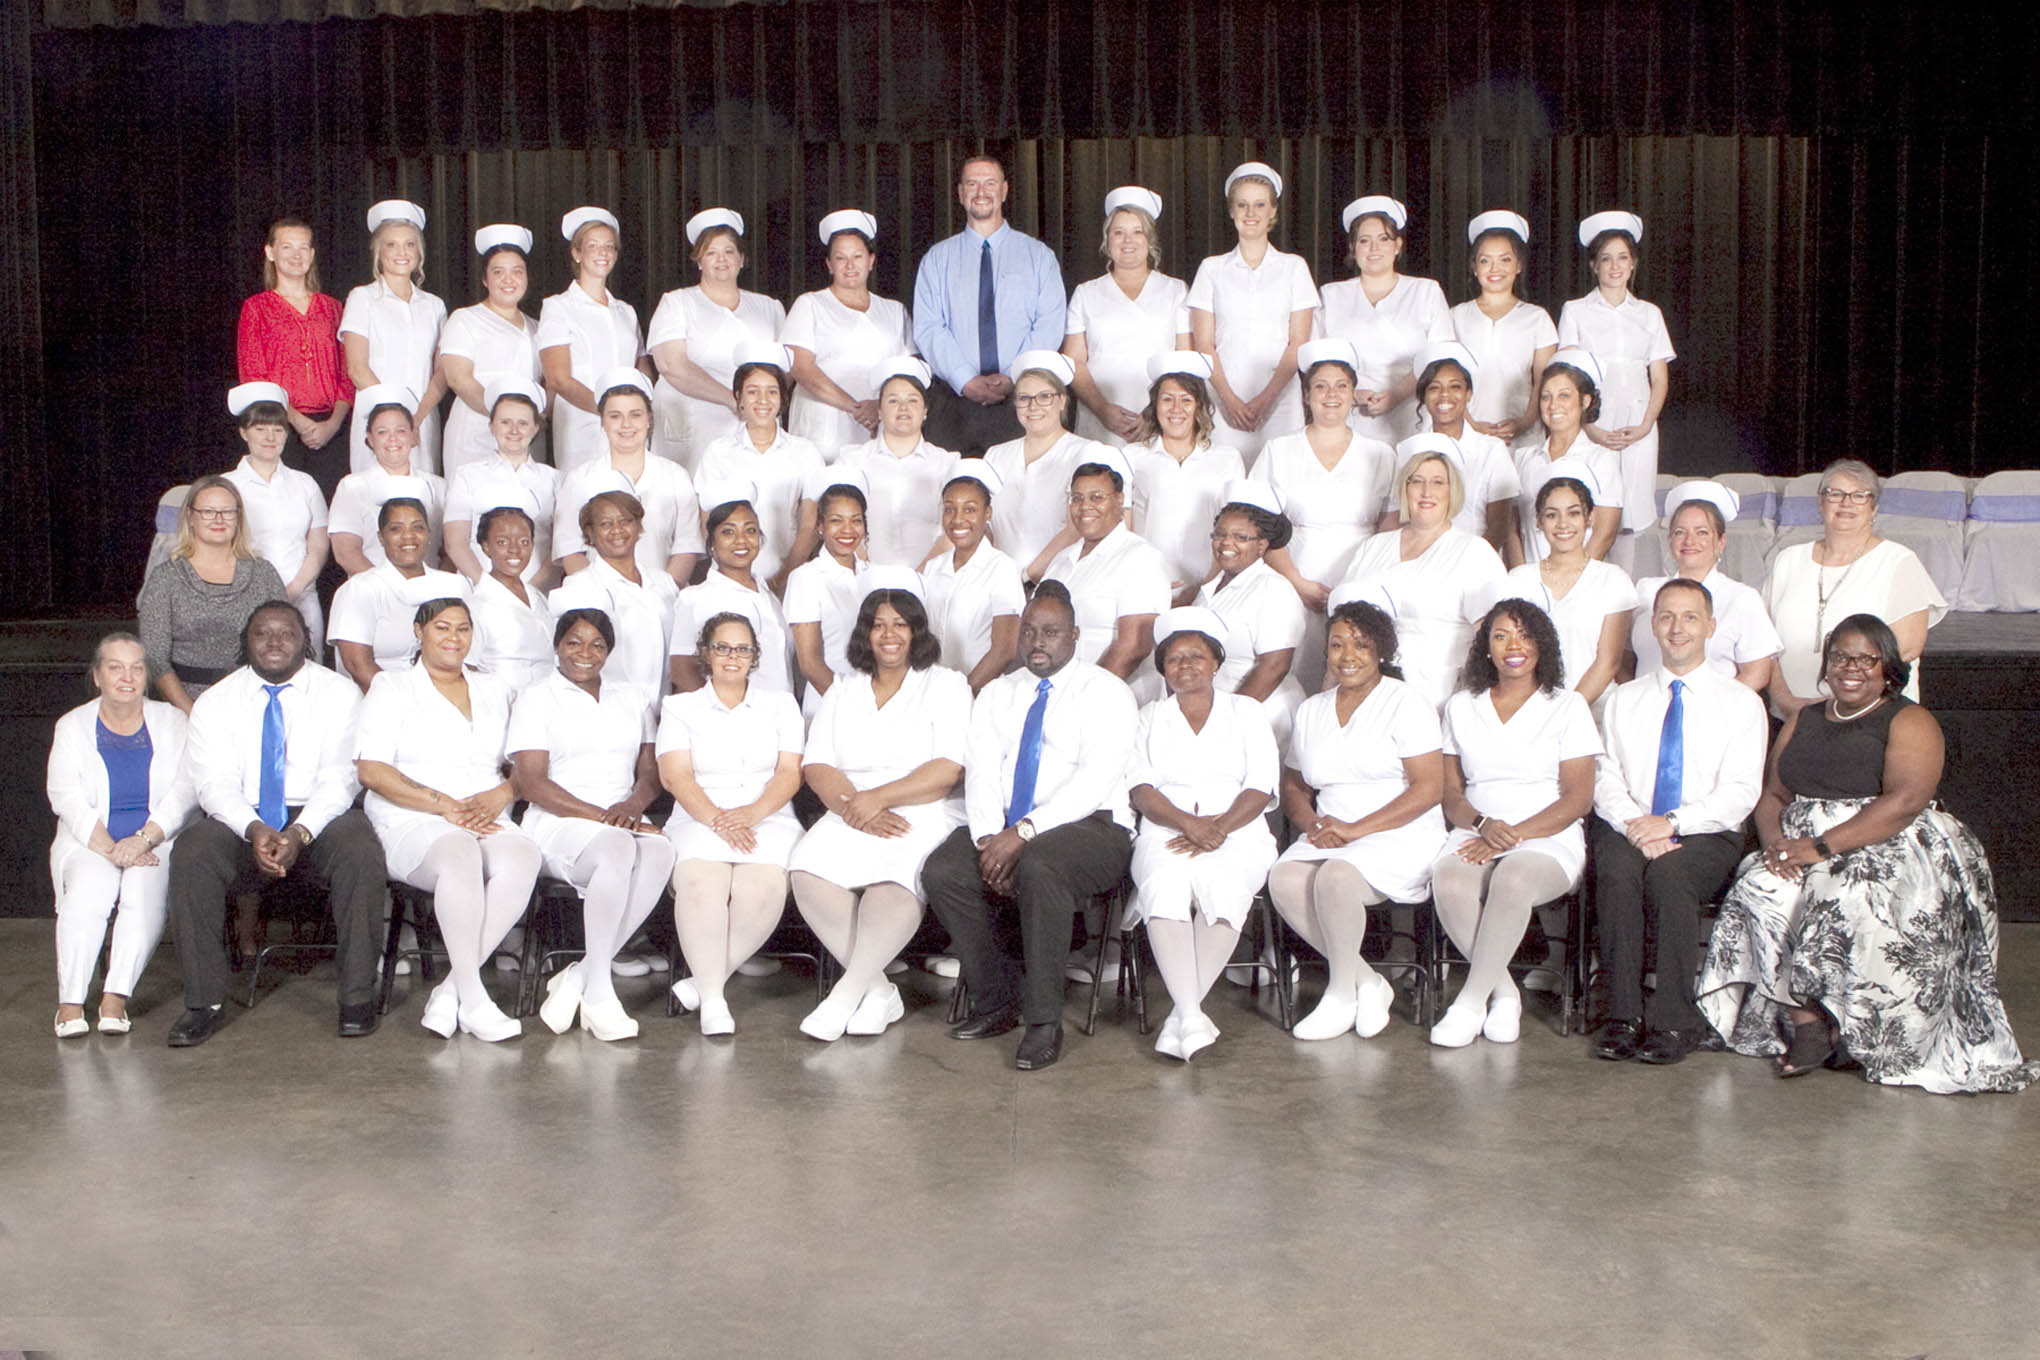 Click to enlarge,  The Central Carolina Community College Louise L. Tuller School of Nursing Practical Nursing program held a Pinning and Candle Lighting Ceremony for the Class of 2019 on Wednesday, July 17, at the Dennis A. Wicker Civic &amp; Conference Center in Sanford, N.C.  